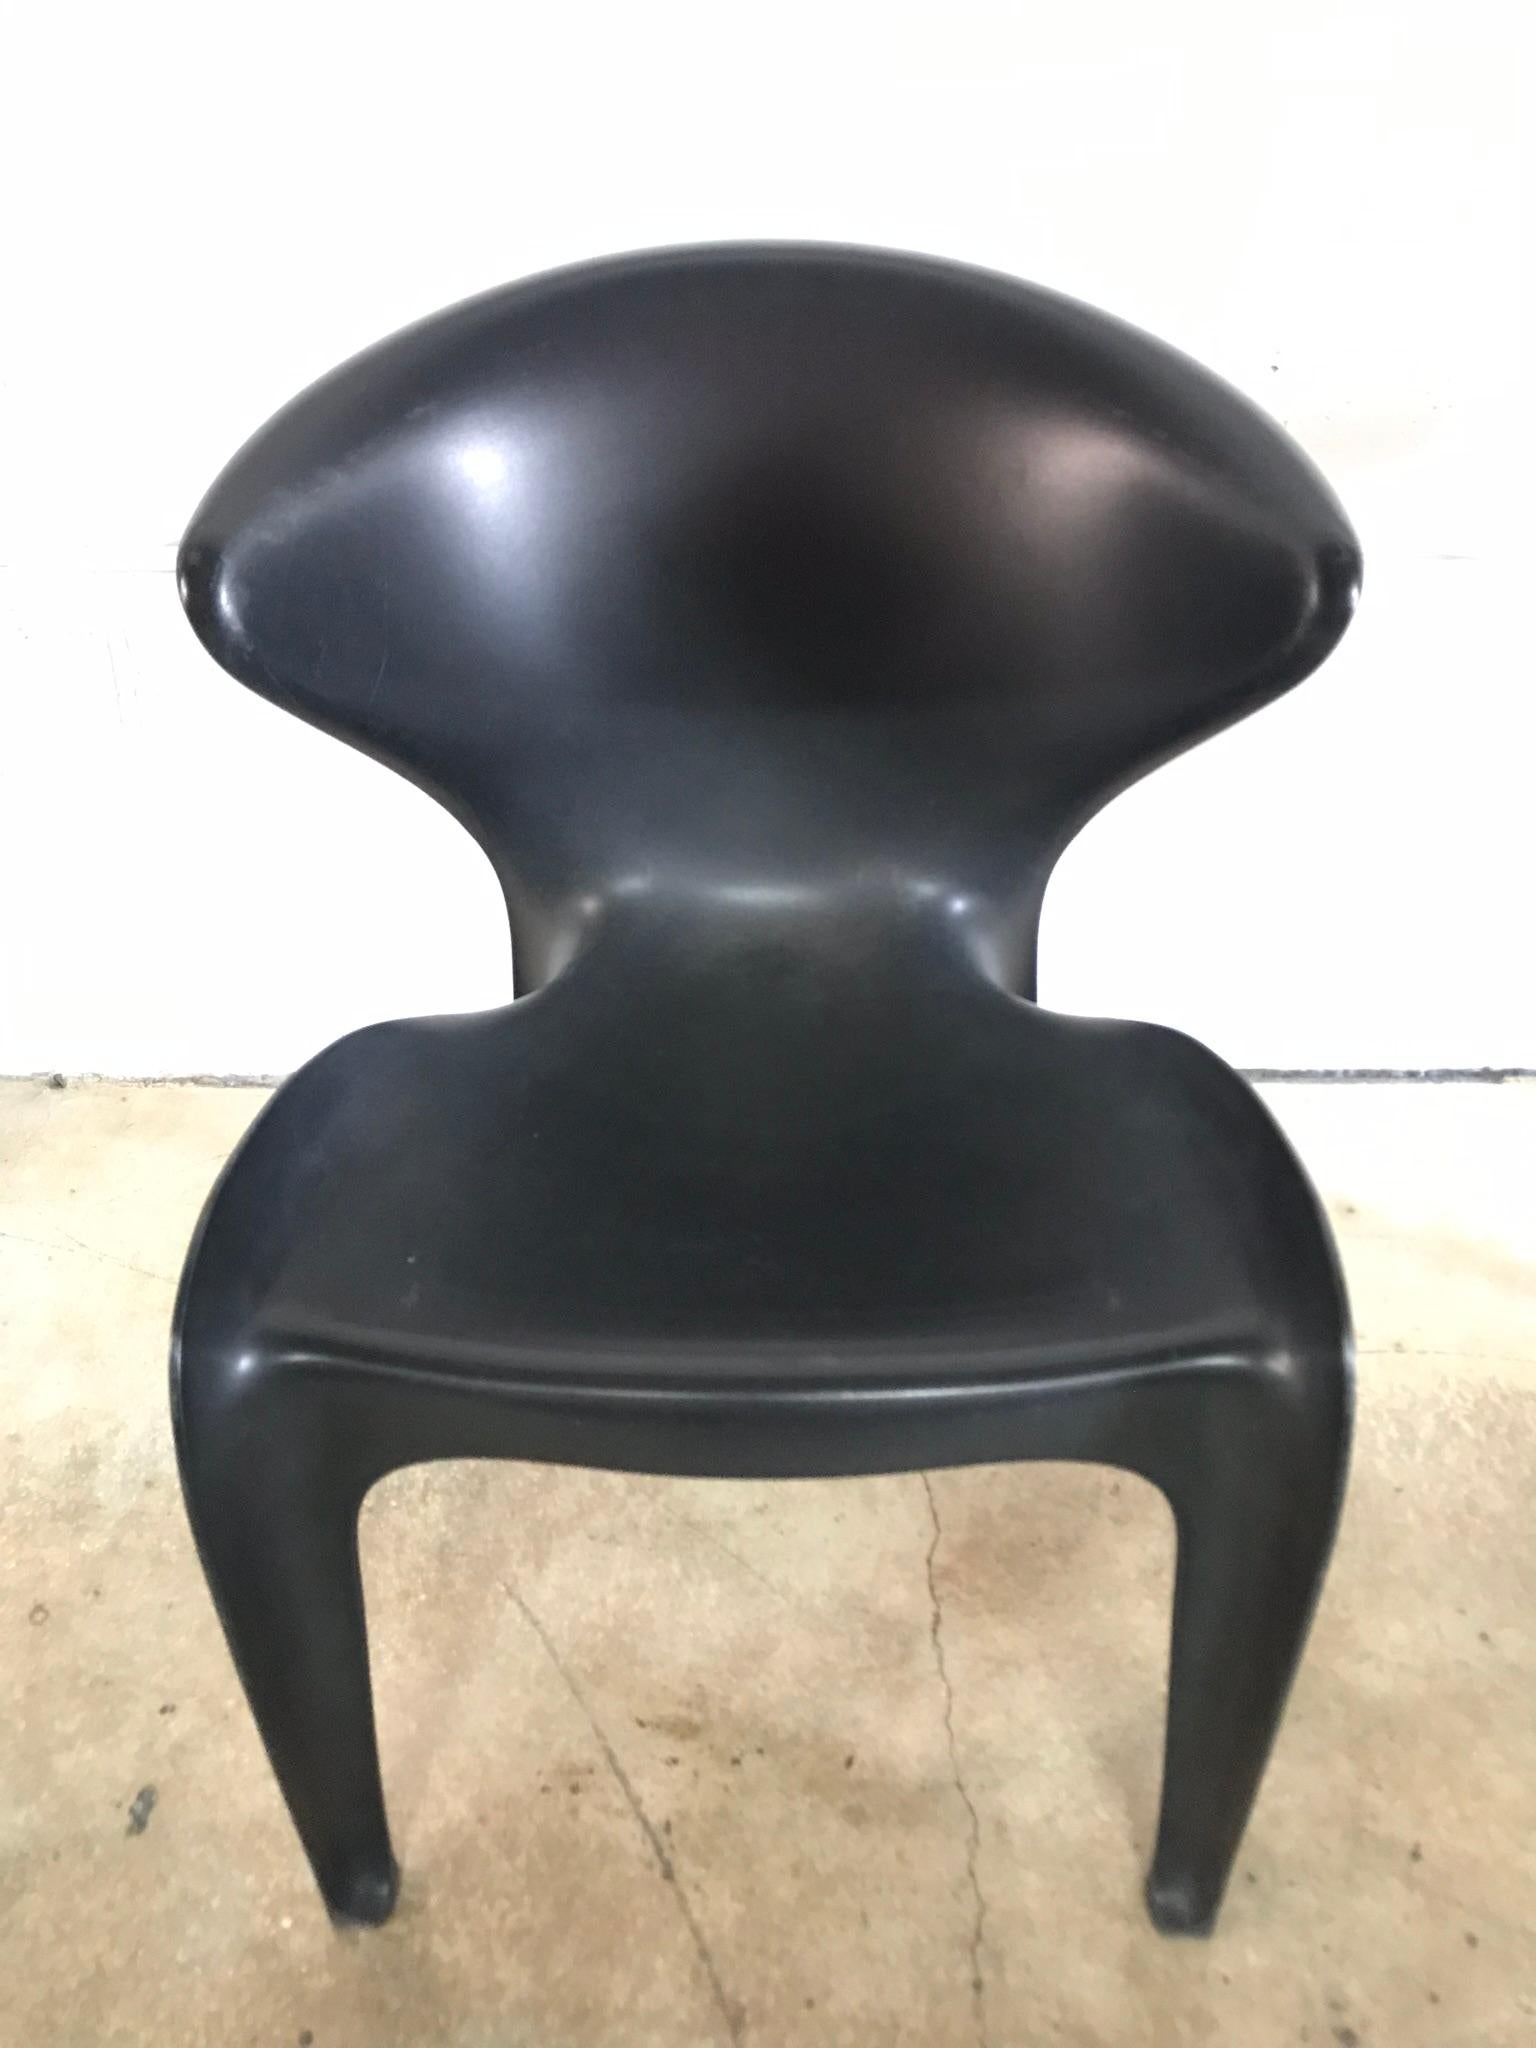 Molded Pair of William Sawaya “Calla” Chairs in Matte Black for Heller, 2002